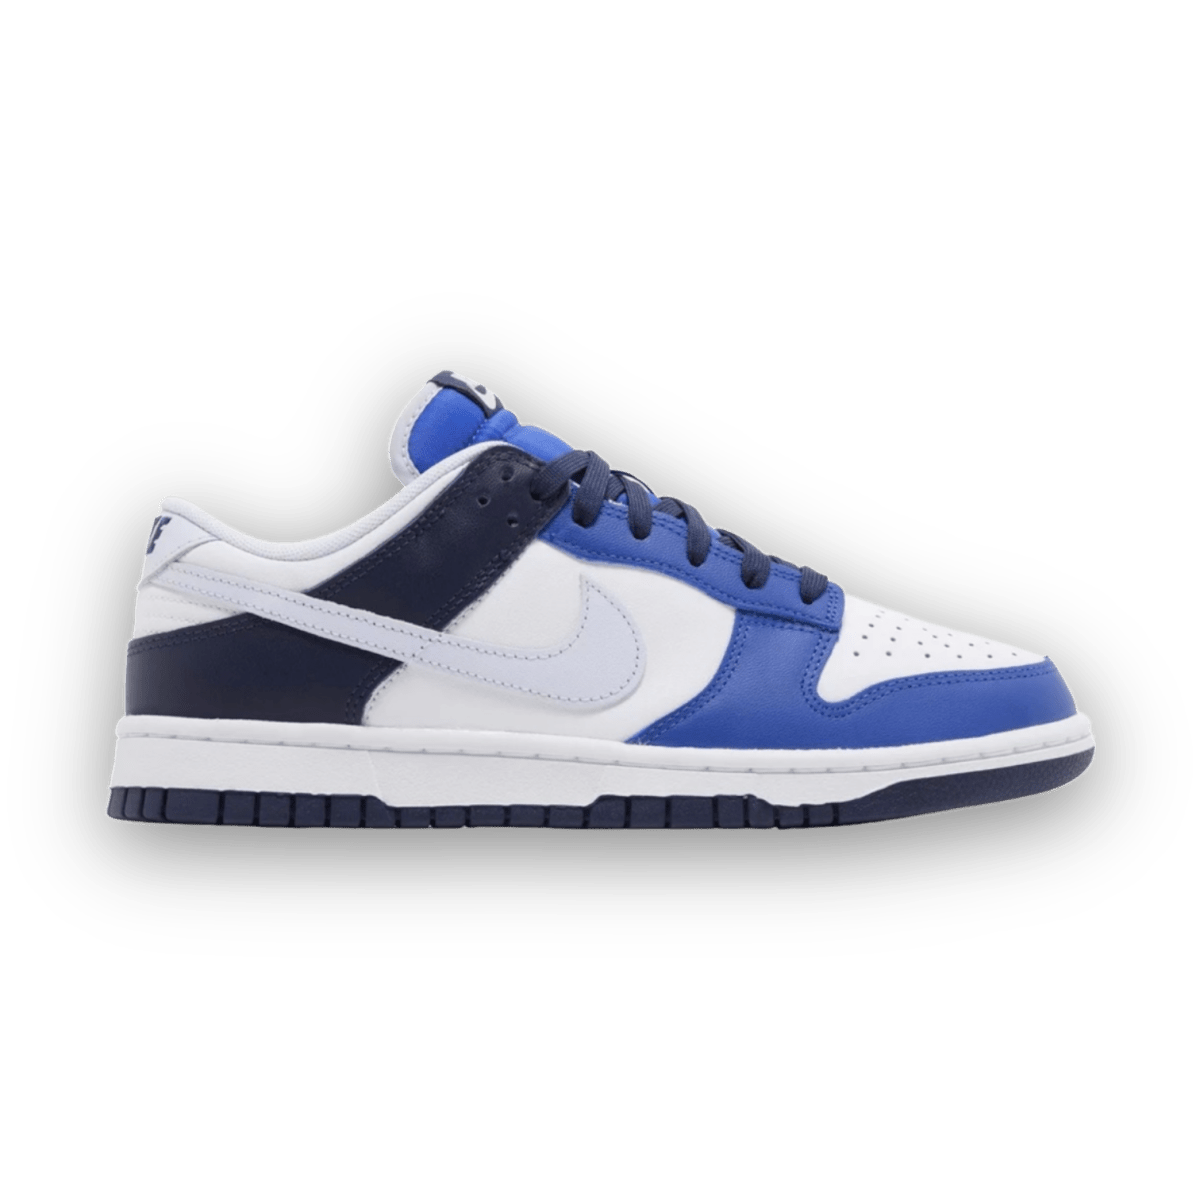 Dunk Low 'Game Royal Navy' - sneaker - Low Sneaker - Dunks - Jawns on Fire